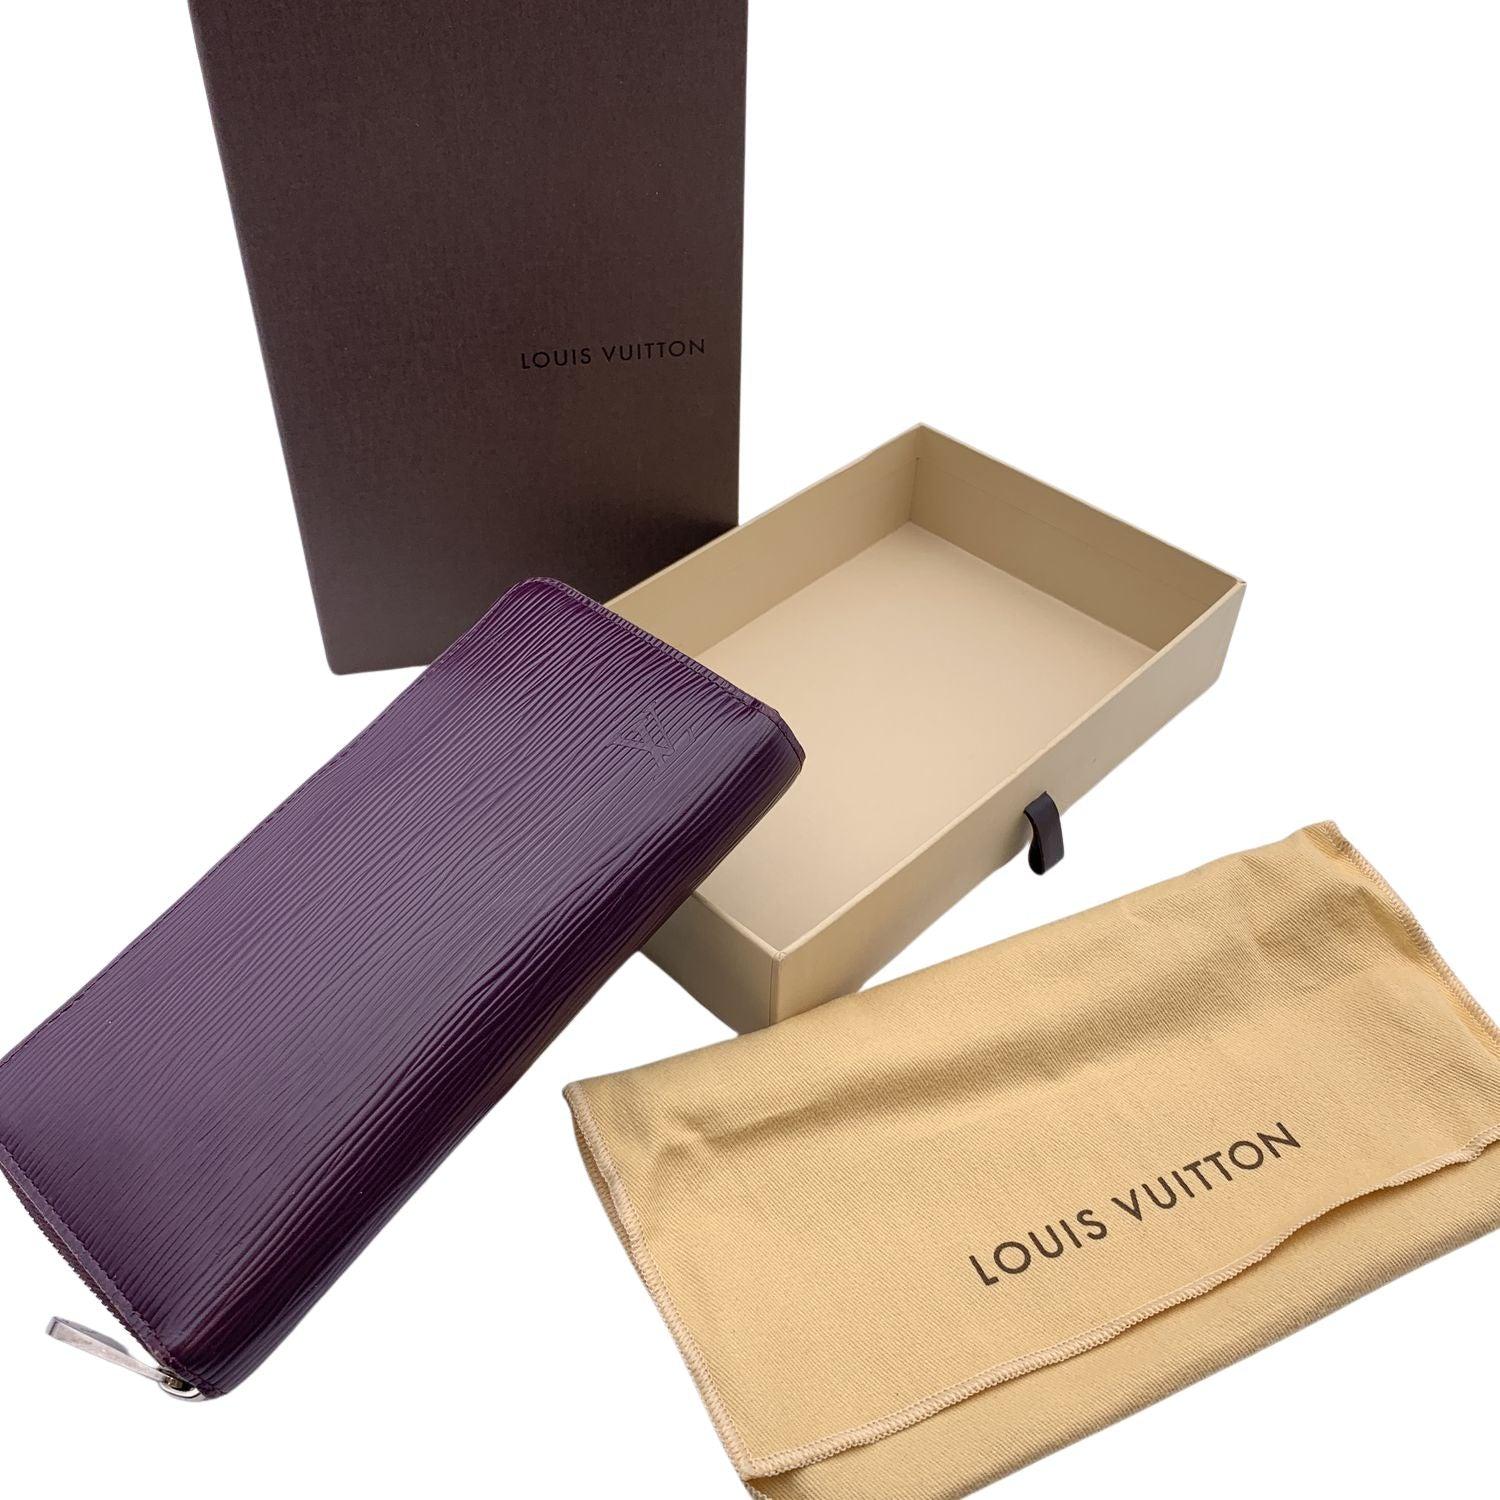 LOUIS VUITTON purple Epi Leather Zippy Wallet. Zip closure. It features 3 bill compartments, 1 zip coin compartment, 3 flat open pocket. 8 credit card slots. 'LOUIS VUITTON Paris - made in Spain' embossed inside. Authenticity serial number embossed